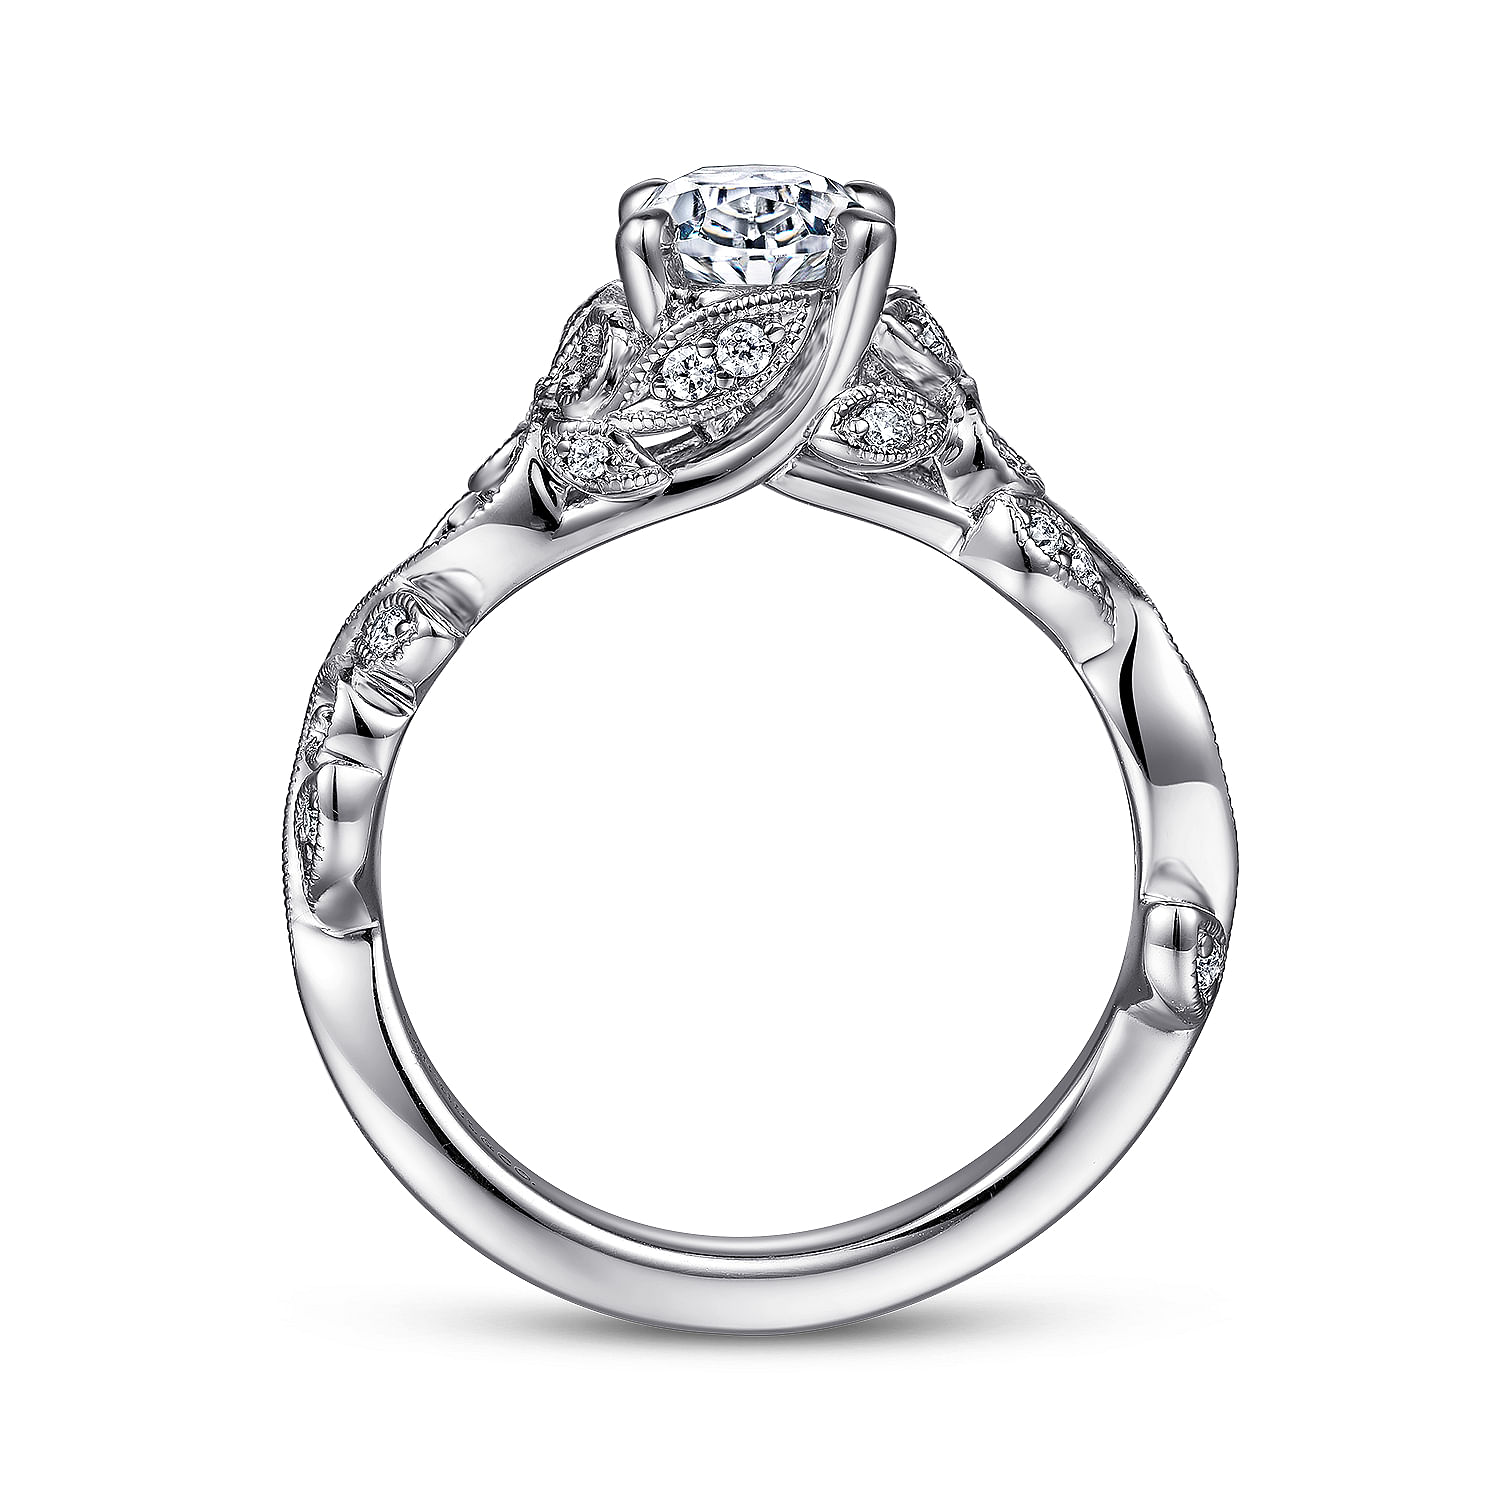 14K White Gold Floral Oval Diamond Engagement Ring